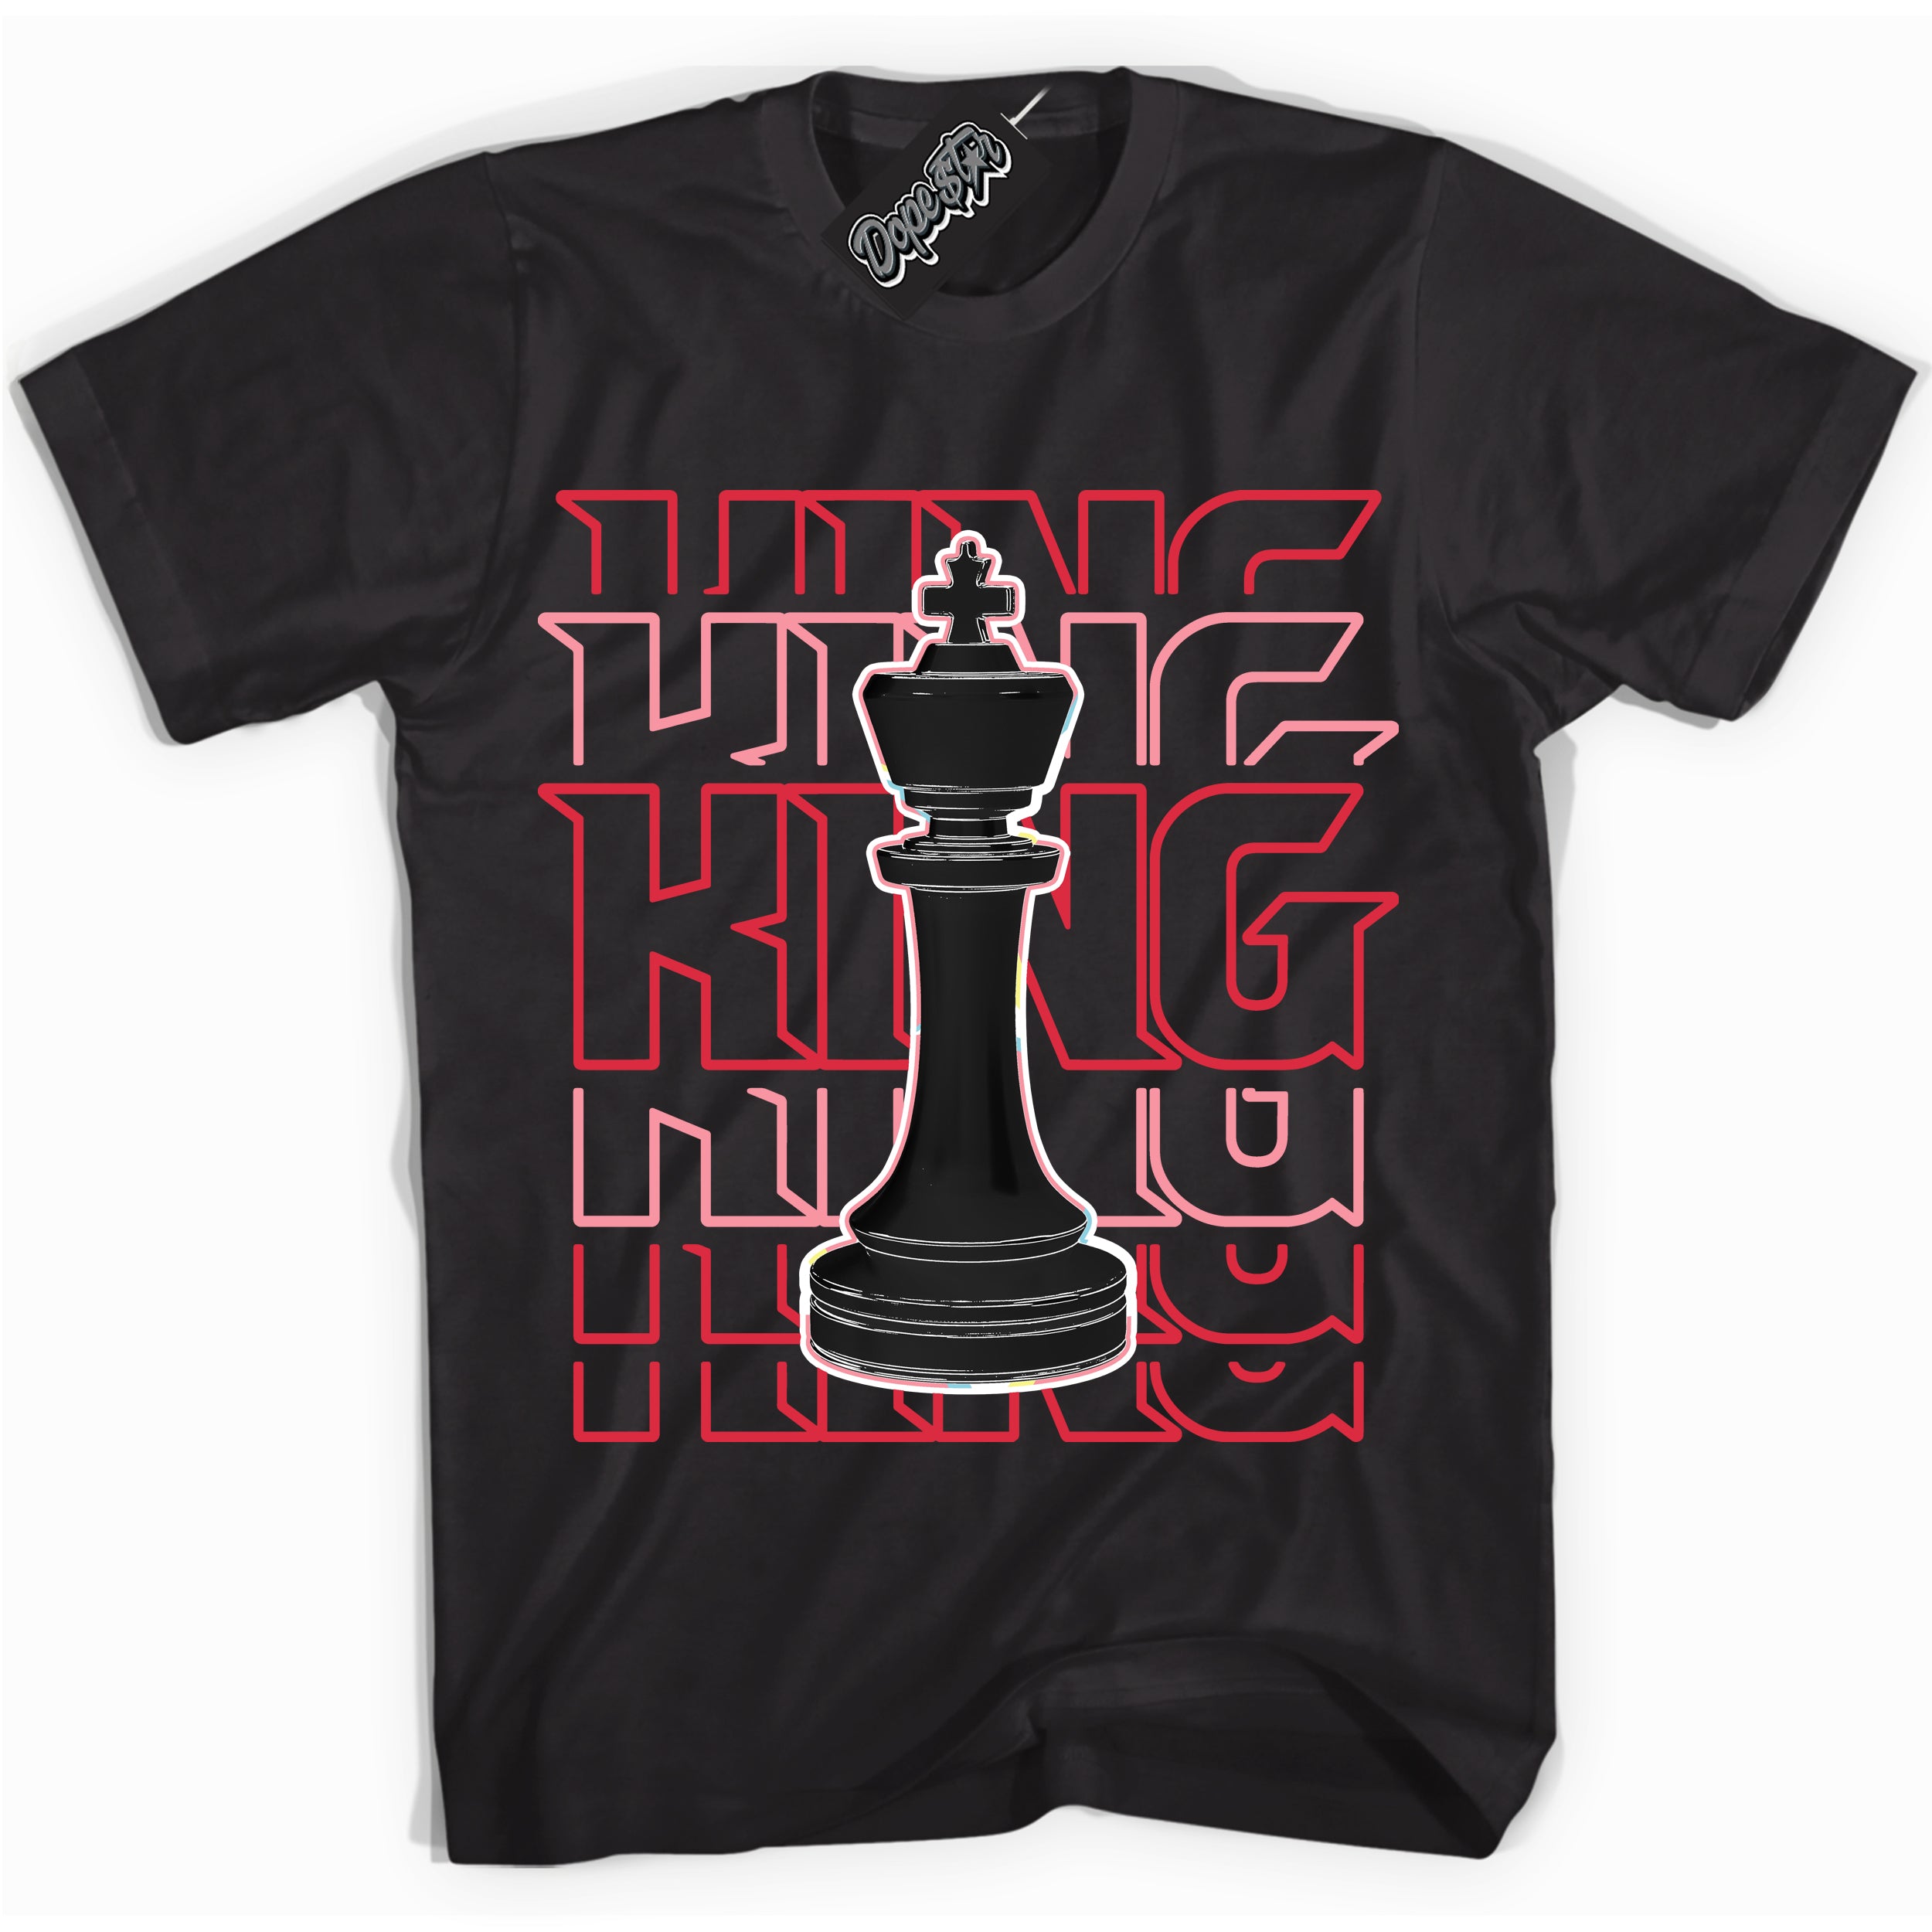 Cool Black graphic tee with “ King Chess ” design, that perfectly matches Spider-Verse 1s sneakers 